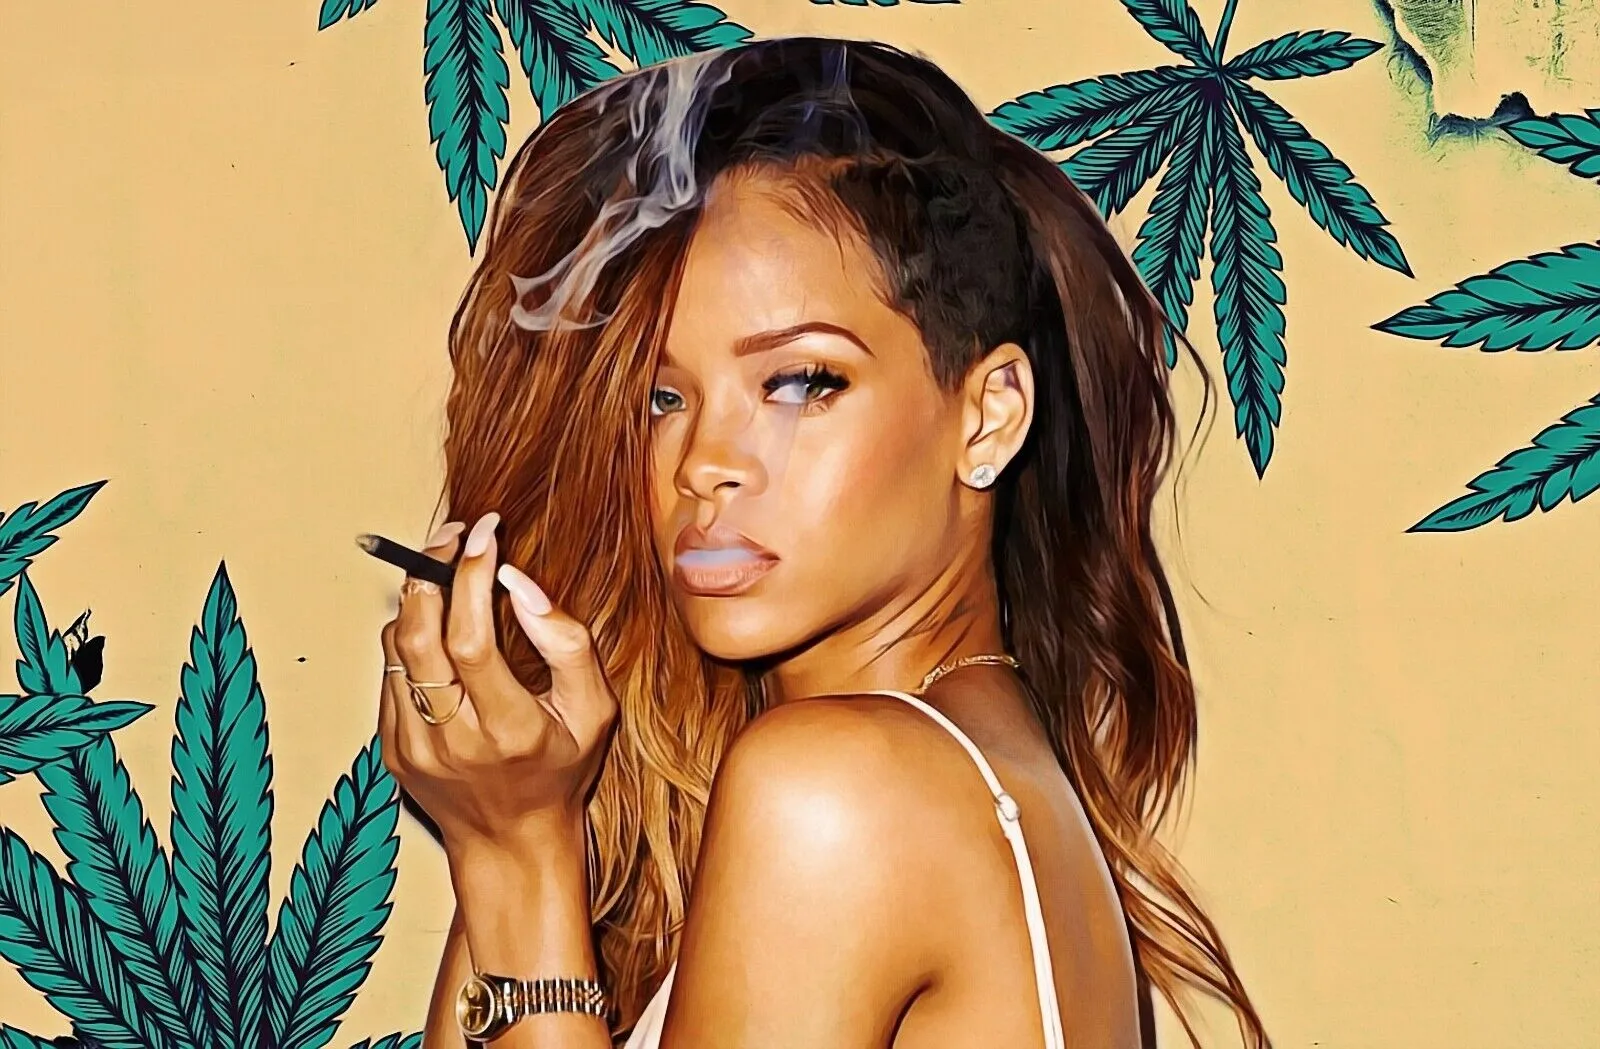 giving-tree-10-celebrities-who-spoke-out-about-weed-rihanna-thumbnail